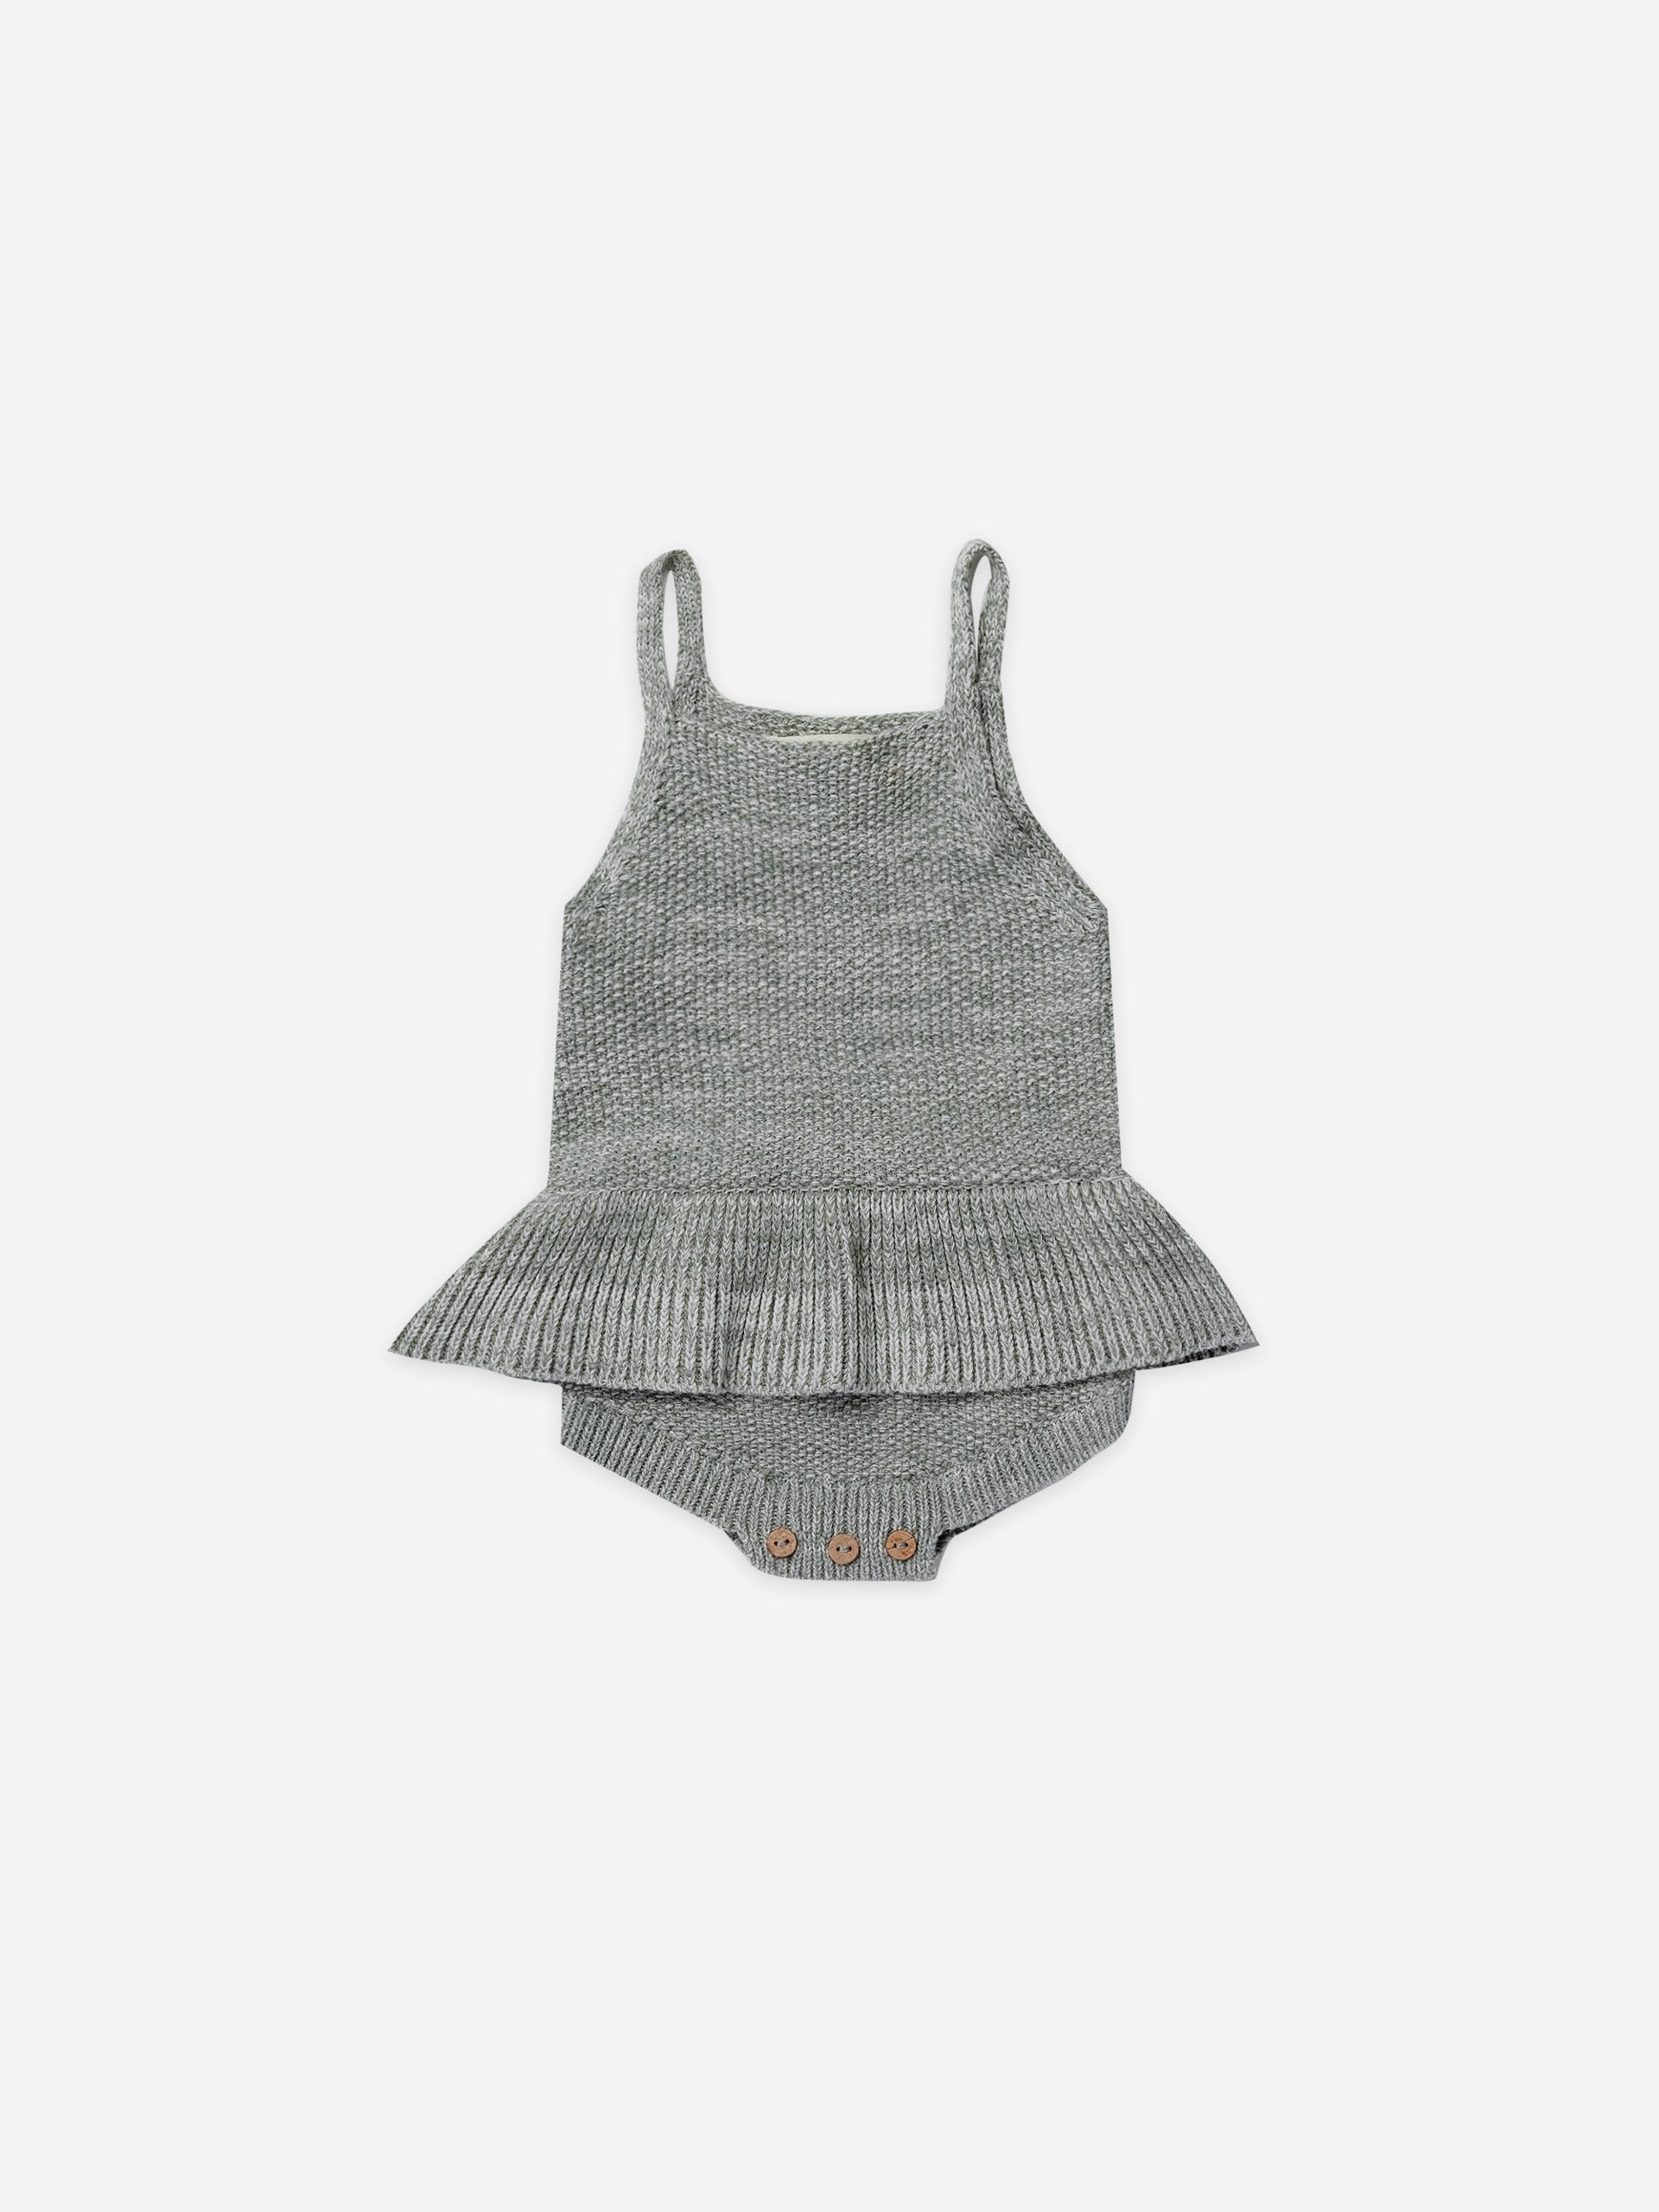 knit ruffle romper | sea green heather - Quincy Mae | Baby Basics | Baby Clothing | Organic Baby Clothes | Modern Baby Boy Clothes |